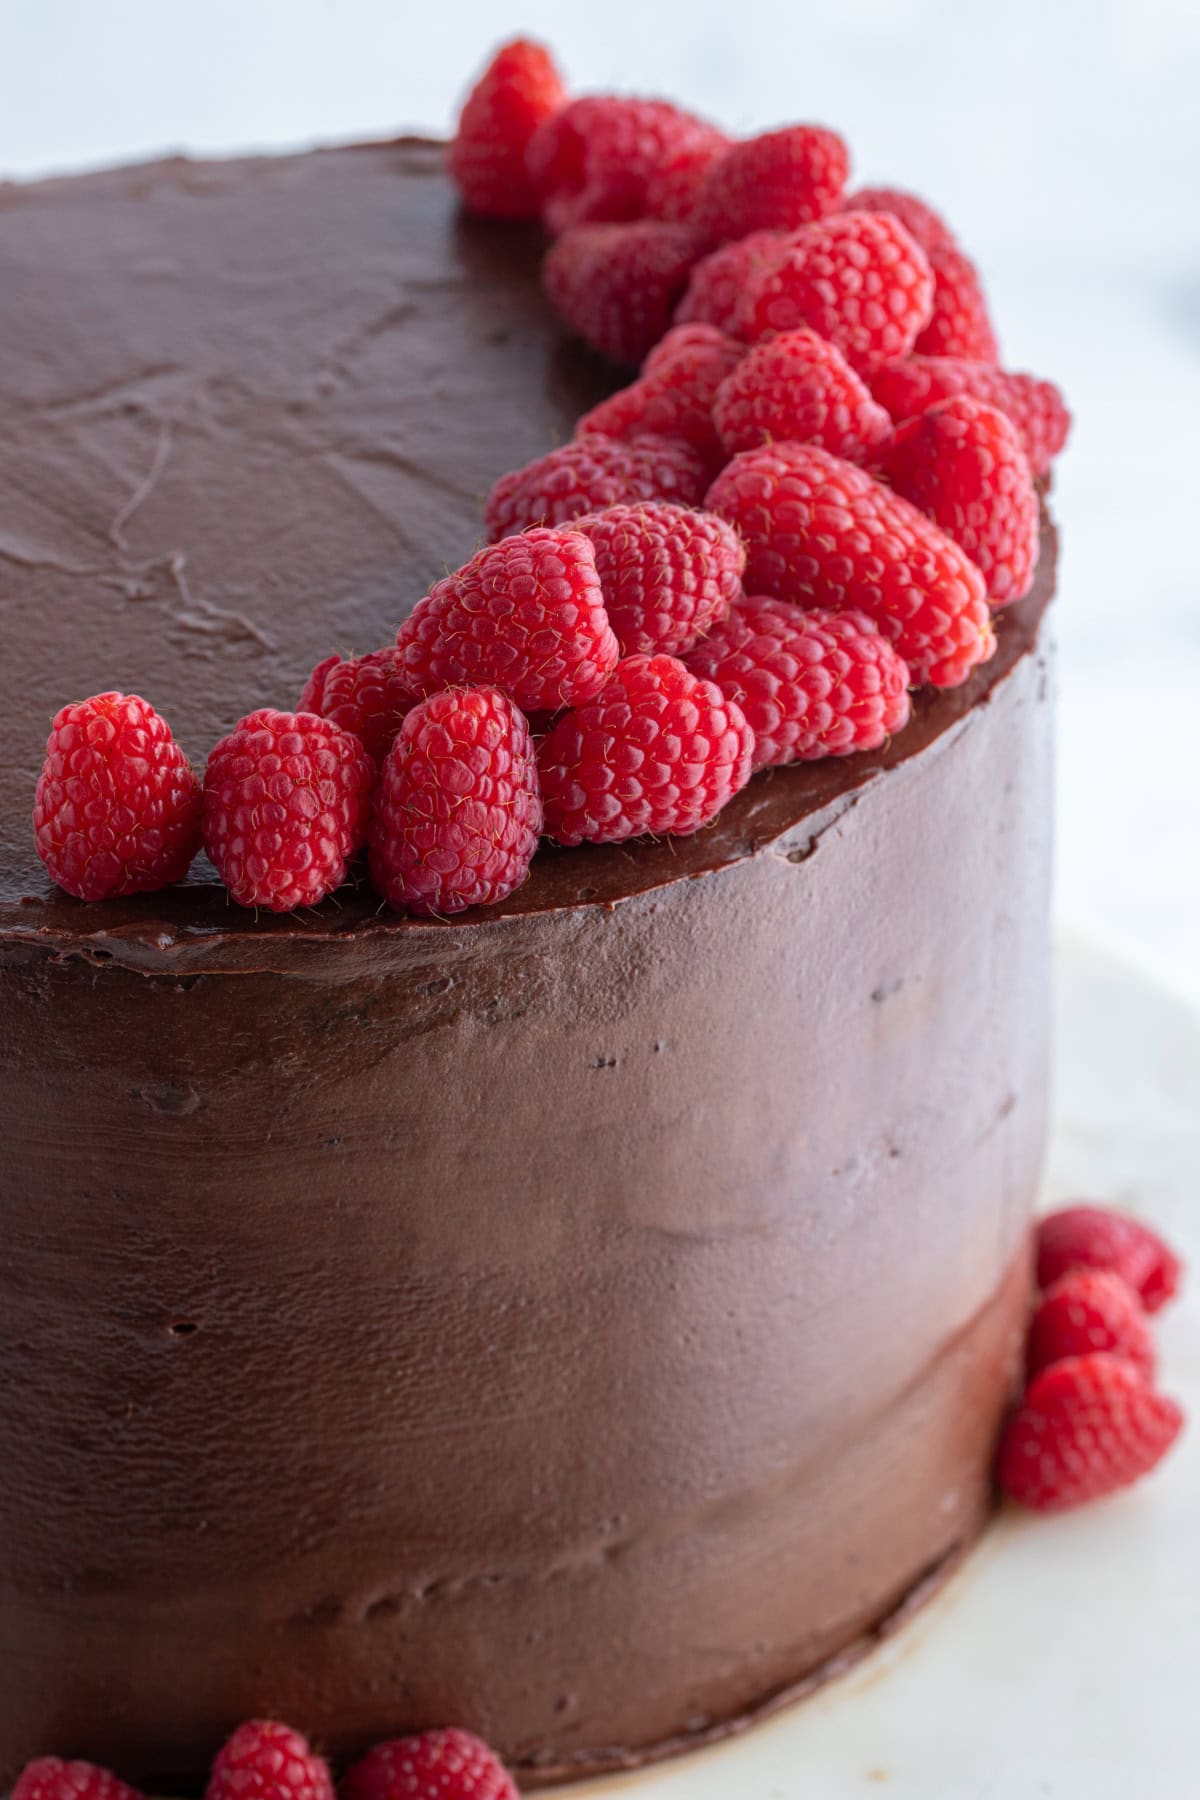 peek at side of double chocolate cake with raspberries on top